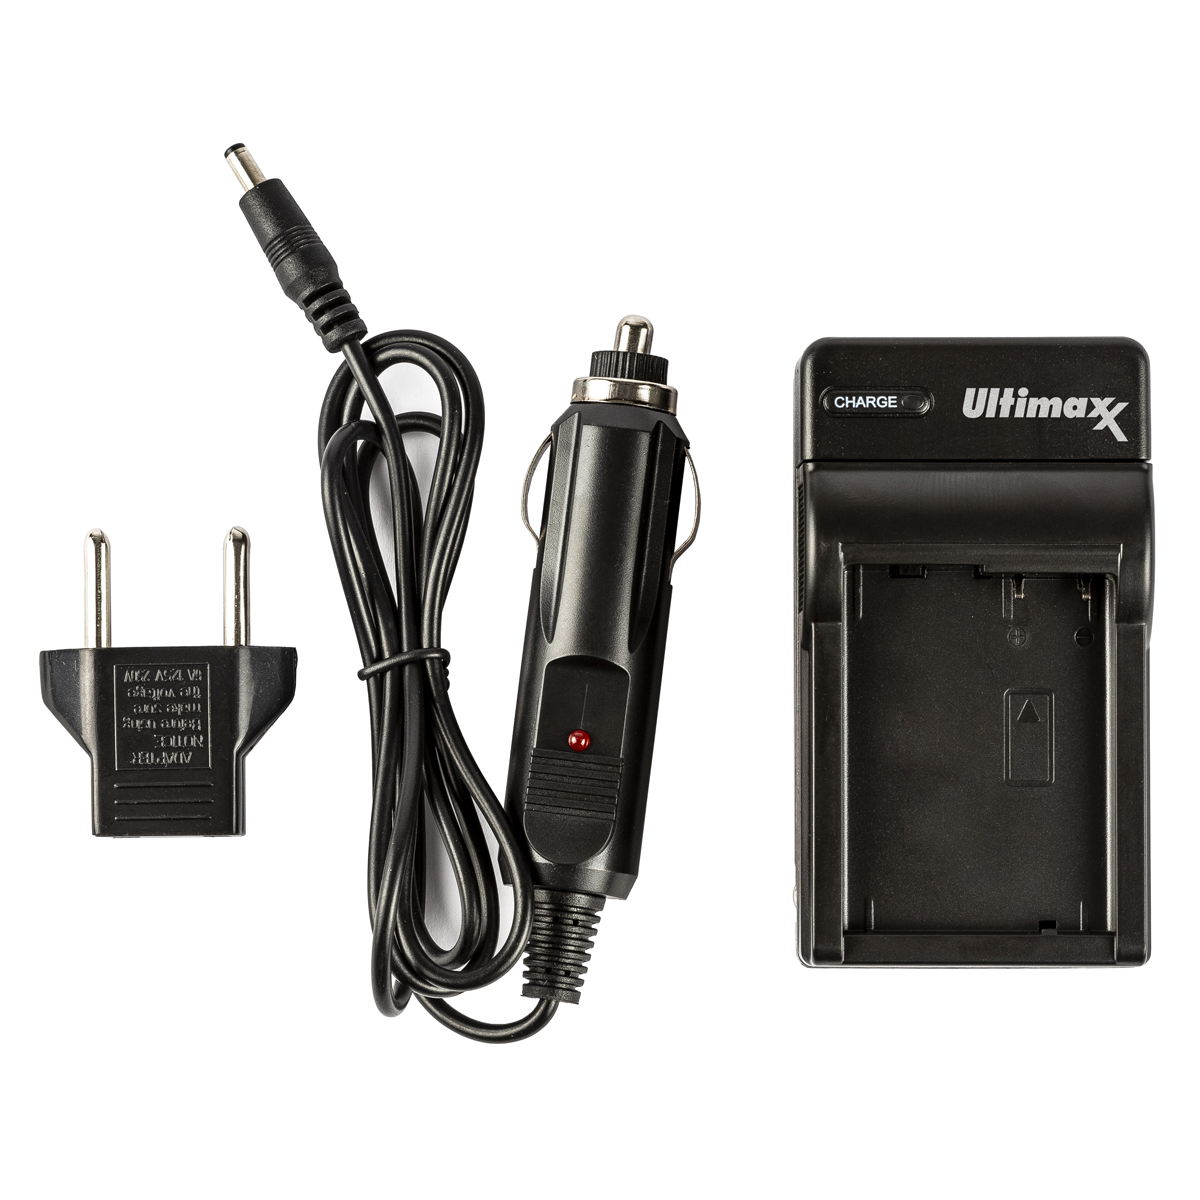 ULTIMAXX Travel Charger for Sony FV100